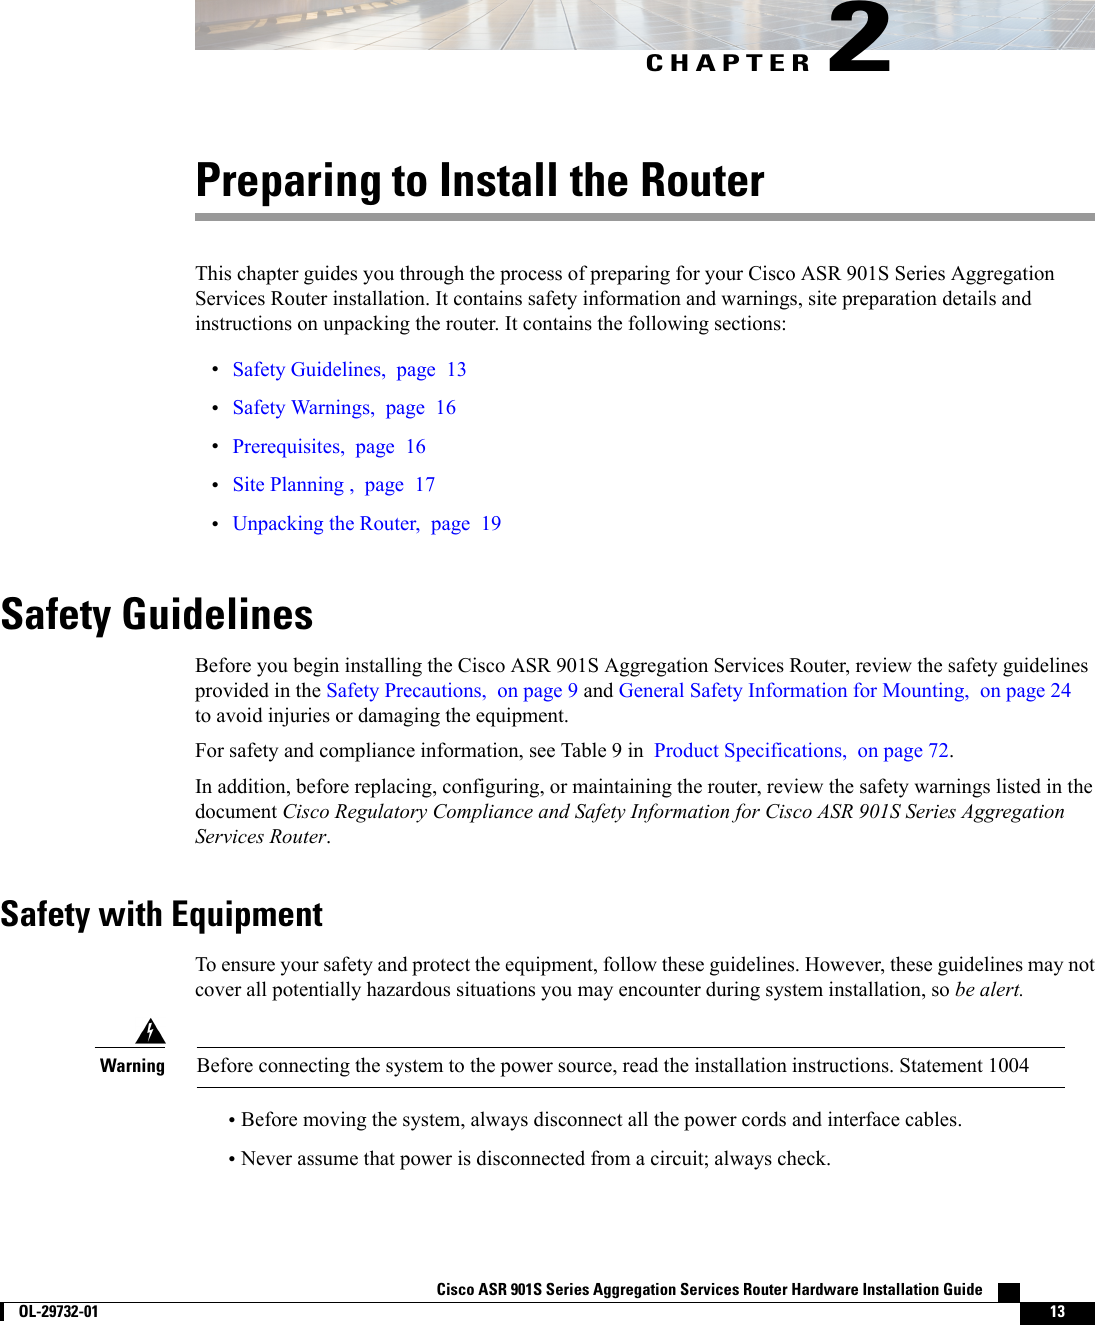 CHAPTER 2Preparing to Install the RouterThis chapter guides you through the process of preparing for your Cisco ASR 901S Series AggregationServices Router installation. It contains safety information and warnings, site preparation details andinstructions on unpacking the router. It contains the following sections:•Safety Guidelines, page 13•Safety Warnings, page 16•Prerequisites, page 16•Site Planning , page 17•Unpacking the Router, page 19Safety GuidelinesBefore you begin installing the Cisco ASR 901S Aggregation Services Router, review the safety guidelinesprovided in the Safety Precautions, on page 9 and General Safety Information for Mounting, on page 24to avoid injuries or damaging the equipment.For safety and compliance information, see Table 9 in Product Specifications, on page 72.In addition, before replacing, configuring, or maintaining the router, review the safety warnings listed in thedocument Cisco Regulatory Compliance and Safety Information for Cisco ASR 901S Series AggregationServices Router.Safety with EquipmentTo ensure your safety and protect the equipment, follow these guidelines. However, these guidelines may notcover all potentially hazardous situations you may encounter during system installation, so be alert.Before connecting the system to the power source, read the installation instructions. Statement 1004Warning•Before moving the system, always disconnect all the power cords and interface cables.•Never assume that power is disconnected from a circuit; always check.Cisco ASR 901S Series Aggregation Services Router Hardware Installation Guide        OL-29732-01 13